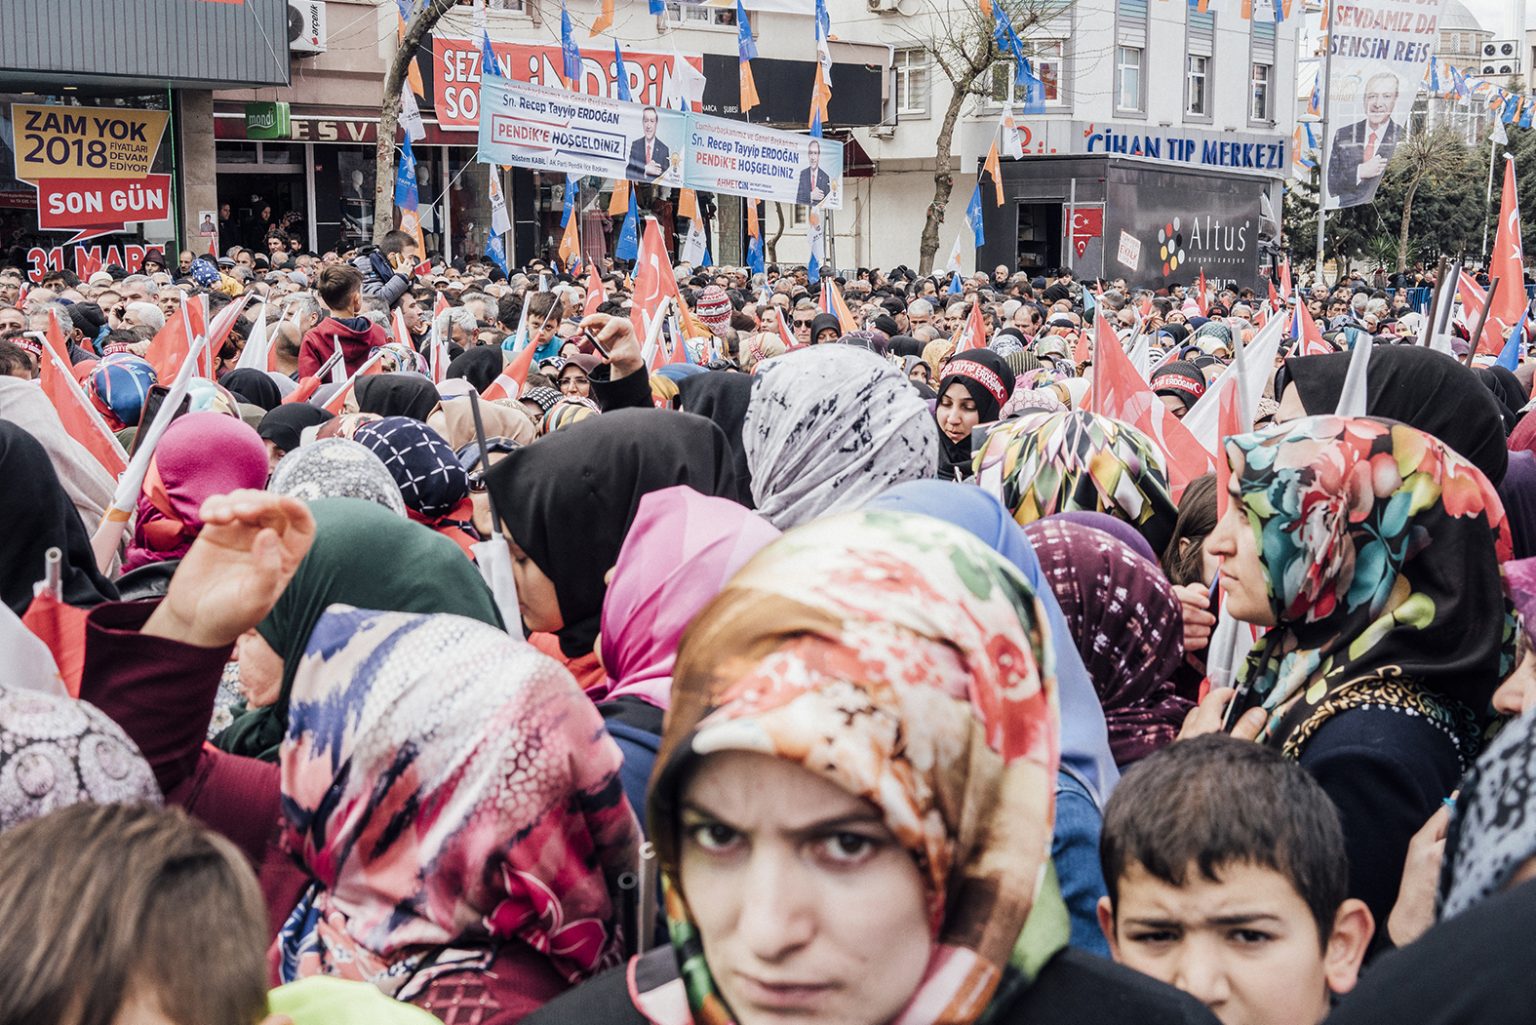 TURKEY. Istanbul, March 2019 – Woman wearing headscarves at a public election campaign rally. Since taking office, Erdogan has encouraged the relaxation of rules against headscarves, which were formerly outlawed as being non-secular, prompting critics to accuse the president of promoting a religious agenda.TURCHIA. Istanbul, March 2019 – Donne a un comizio elettore attendono l'arrivo del presidente Erdogan.